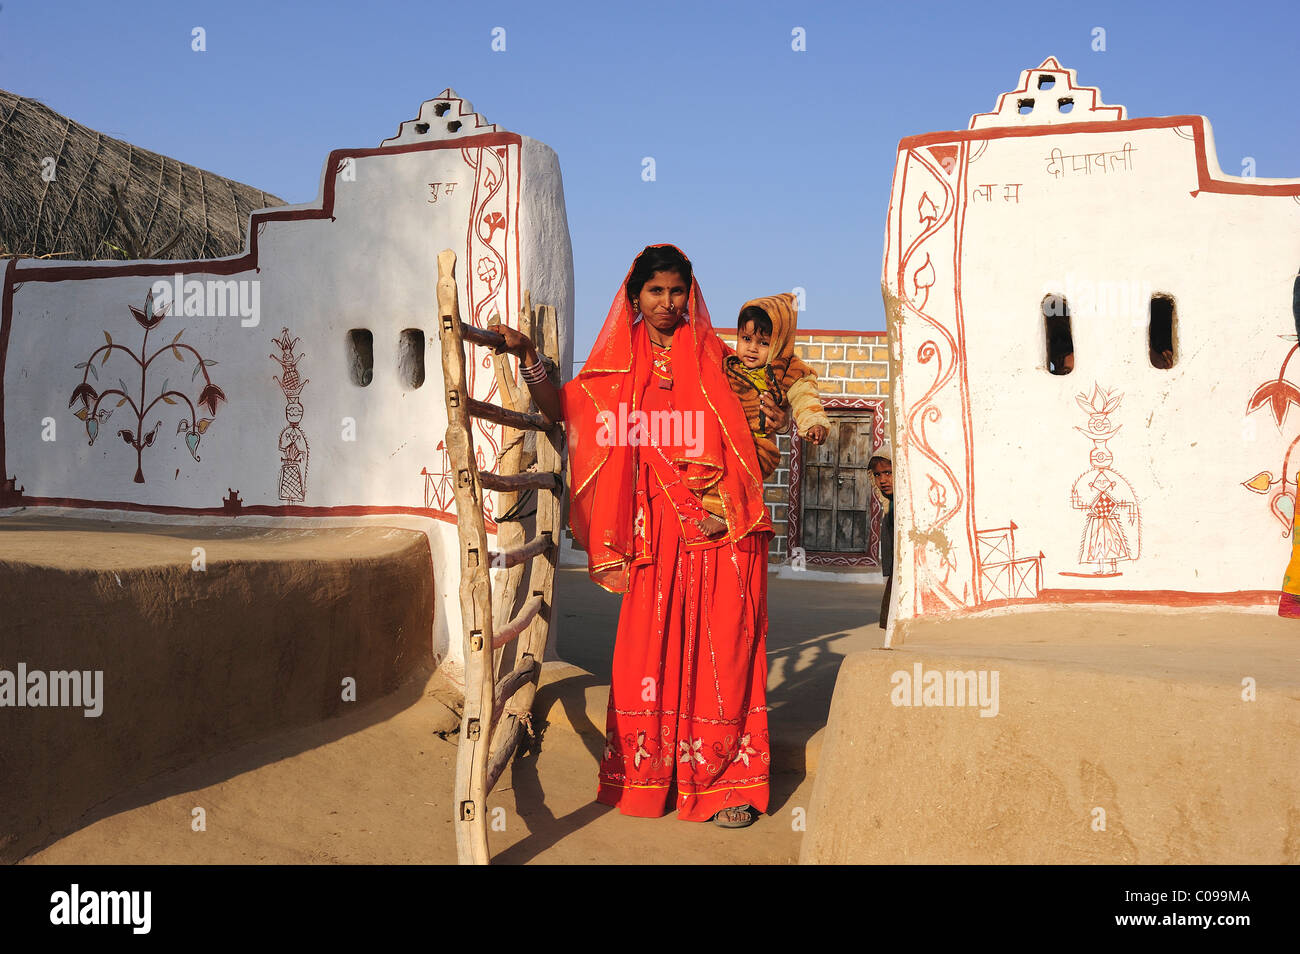 Woman in a sari with a toddler, traditionally painted entrance to a courtyard, Thar Desert, Rajasthan, North India, India, Asia Stock Photo